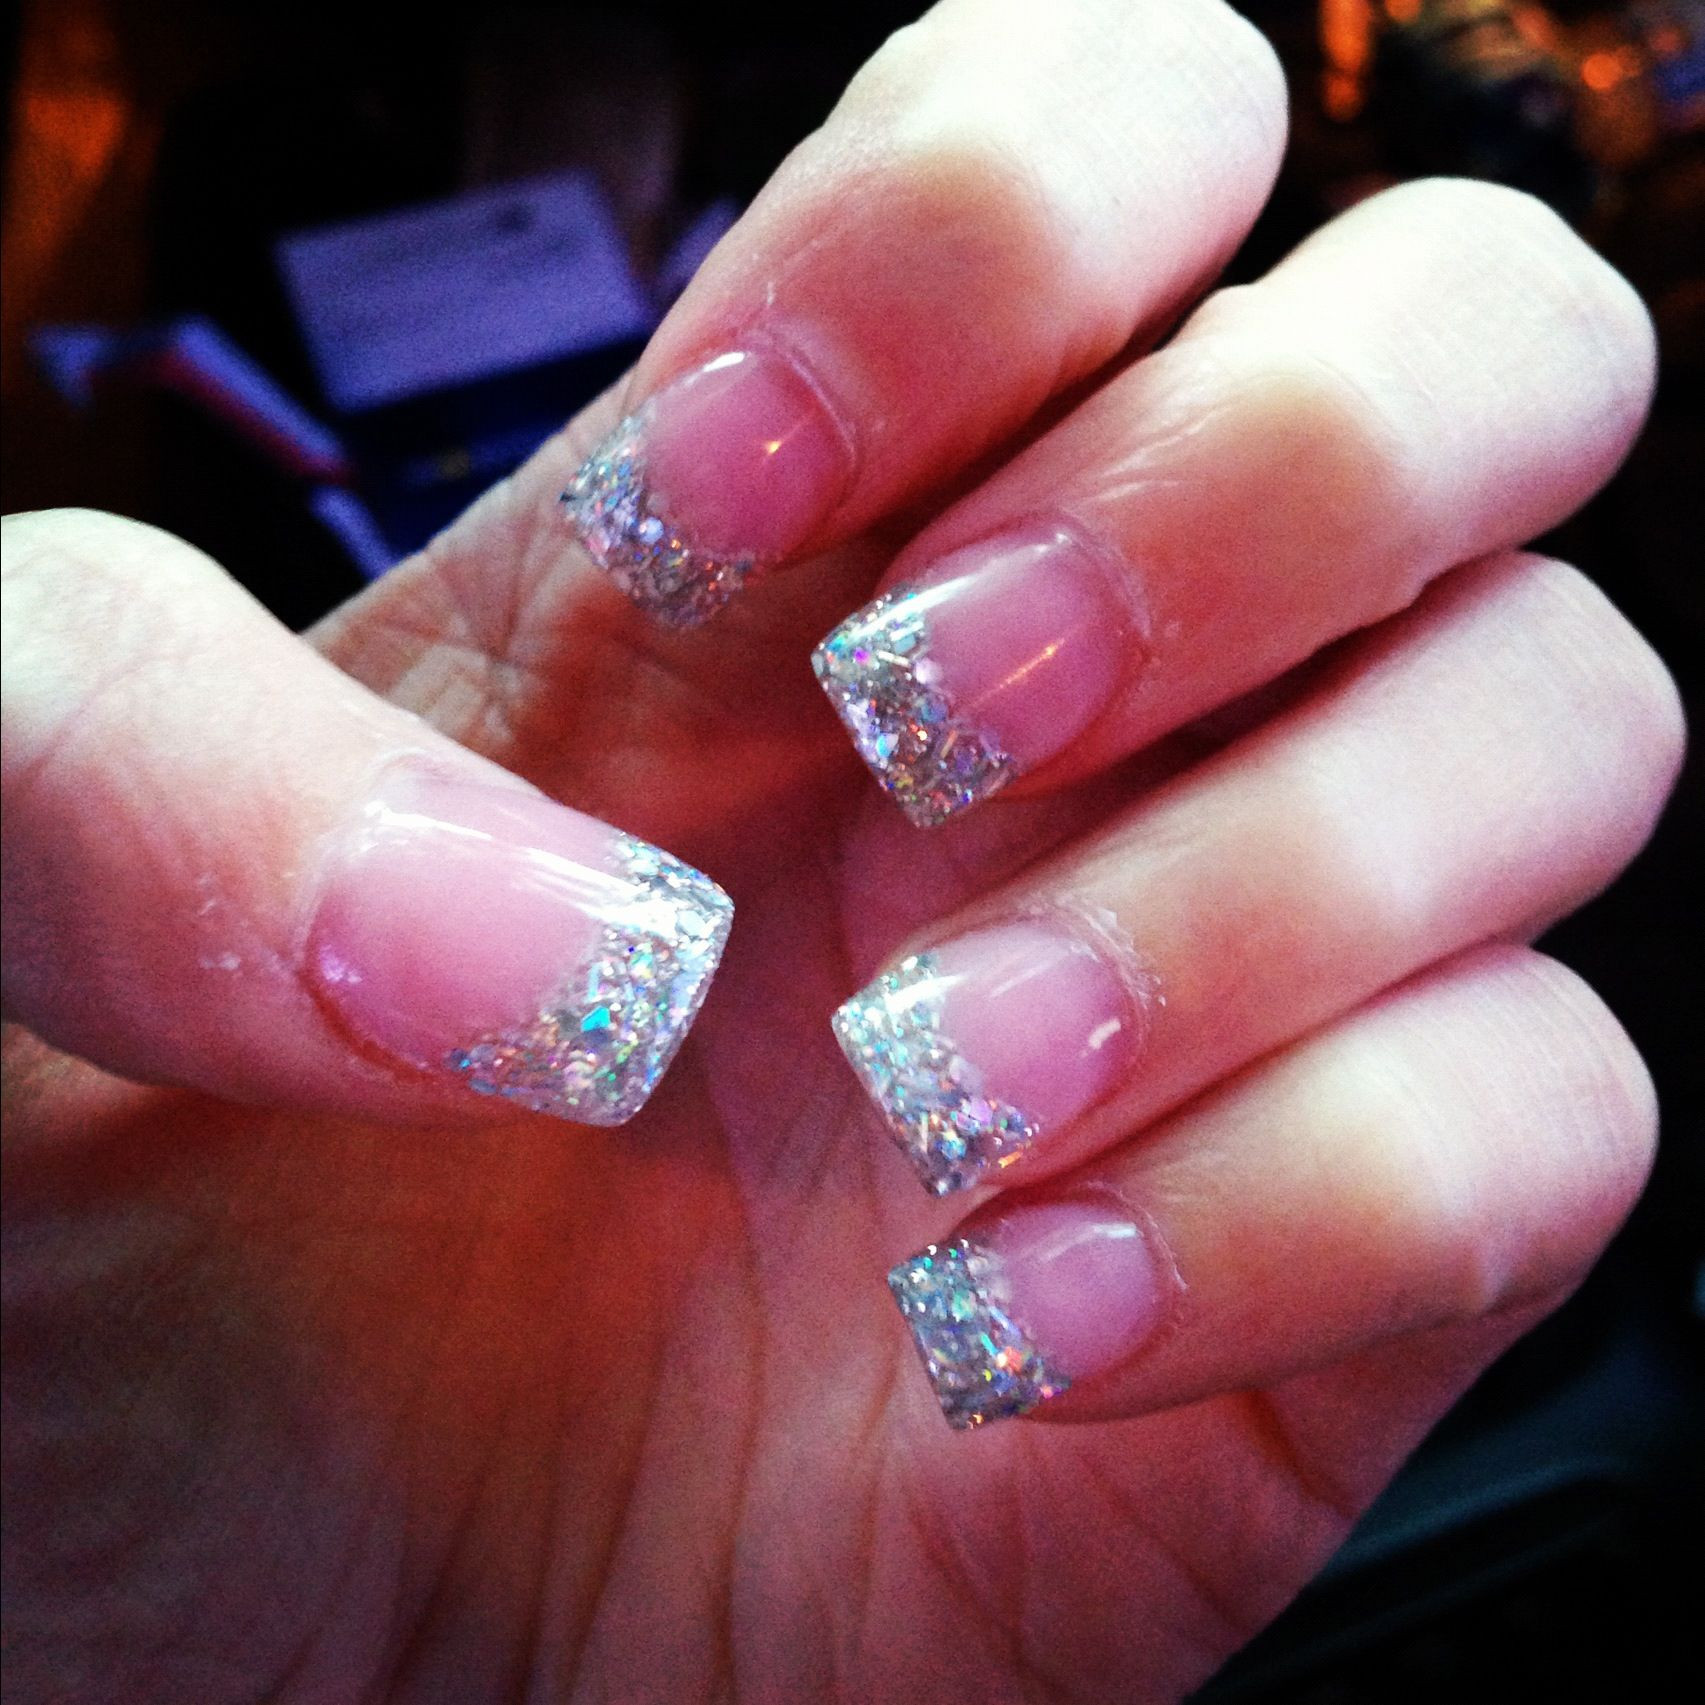 Acrylic Nails With Glitter Tips
 Pink and white acrylic with glitter tips